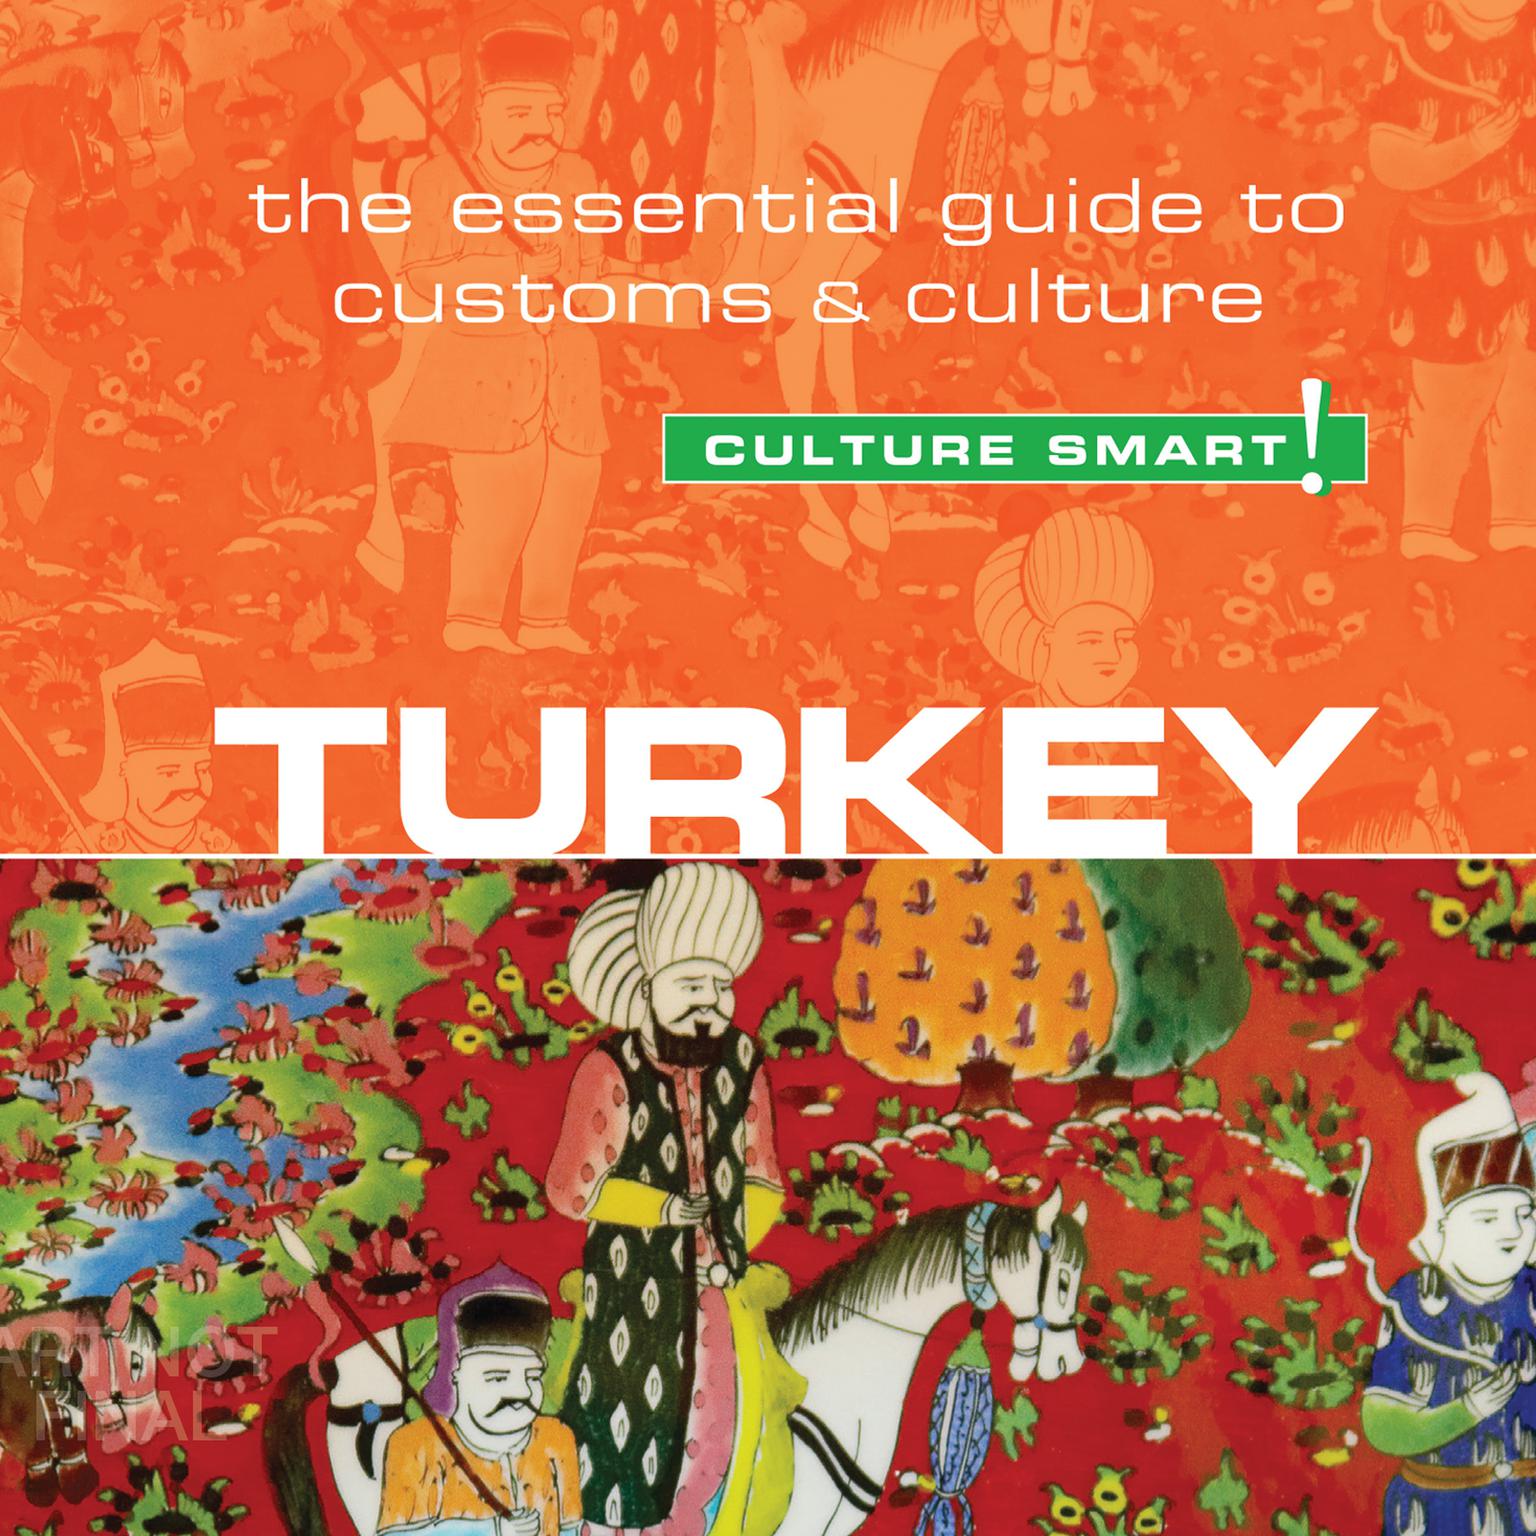 Turkey - Culture Smart!: The Essential Guide to Customs and Culture Audiobook, by Charlotte McPherson